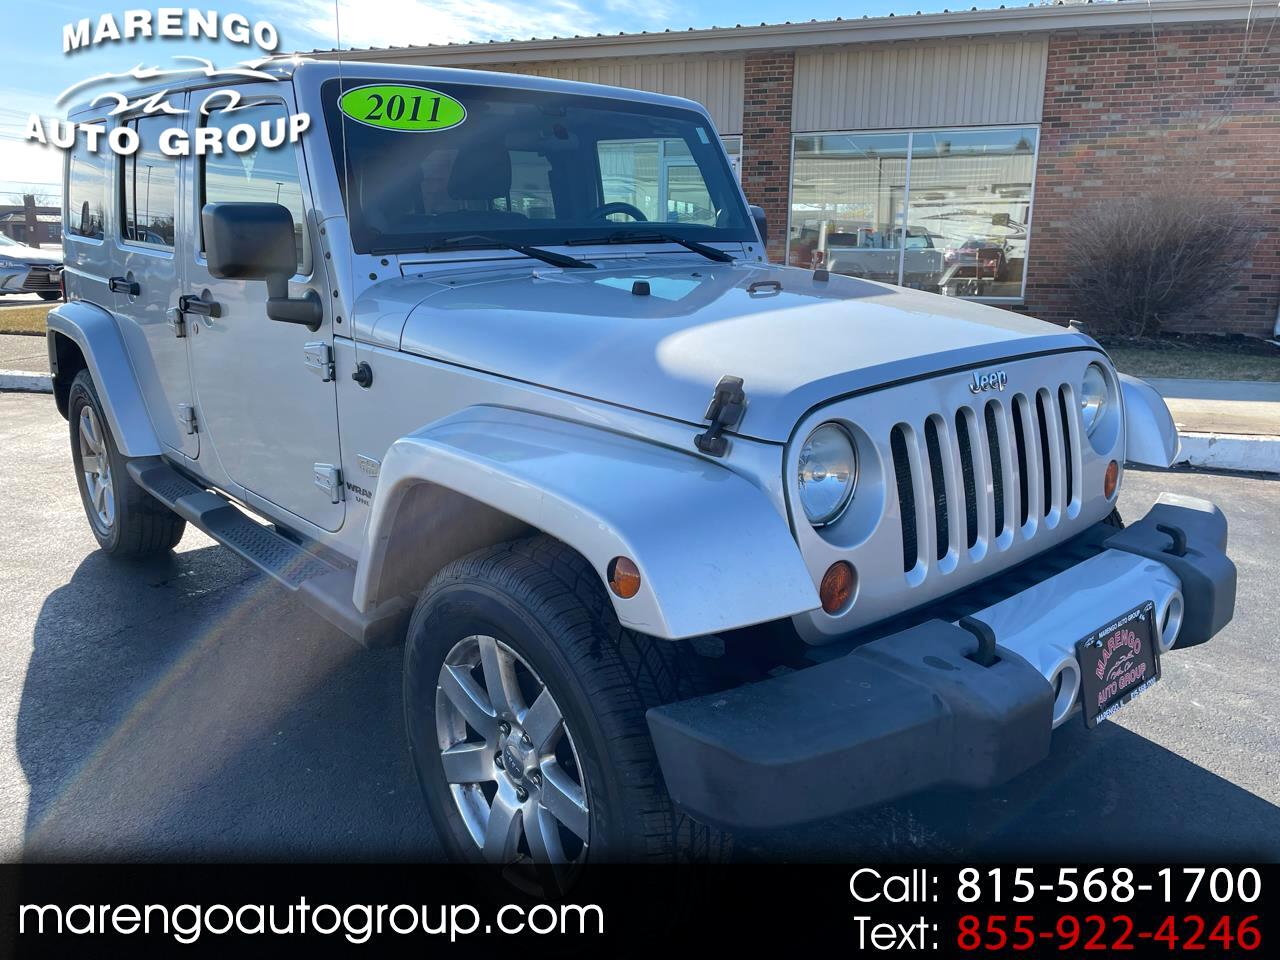 Used 2011 Jeep Wrangler Unlimited 4WD 4dr 70th Anniversary *Ltd Avail* for  Sale in Marengo IL 60152 Marengo Auto Group